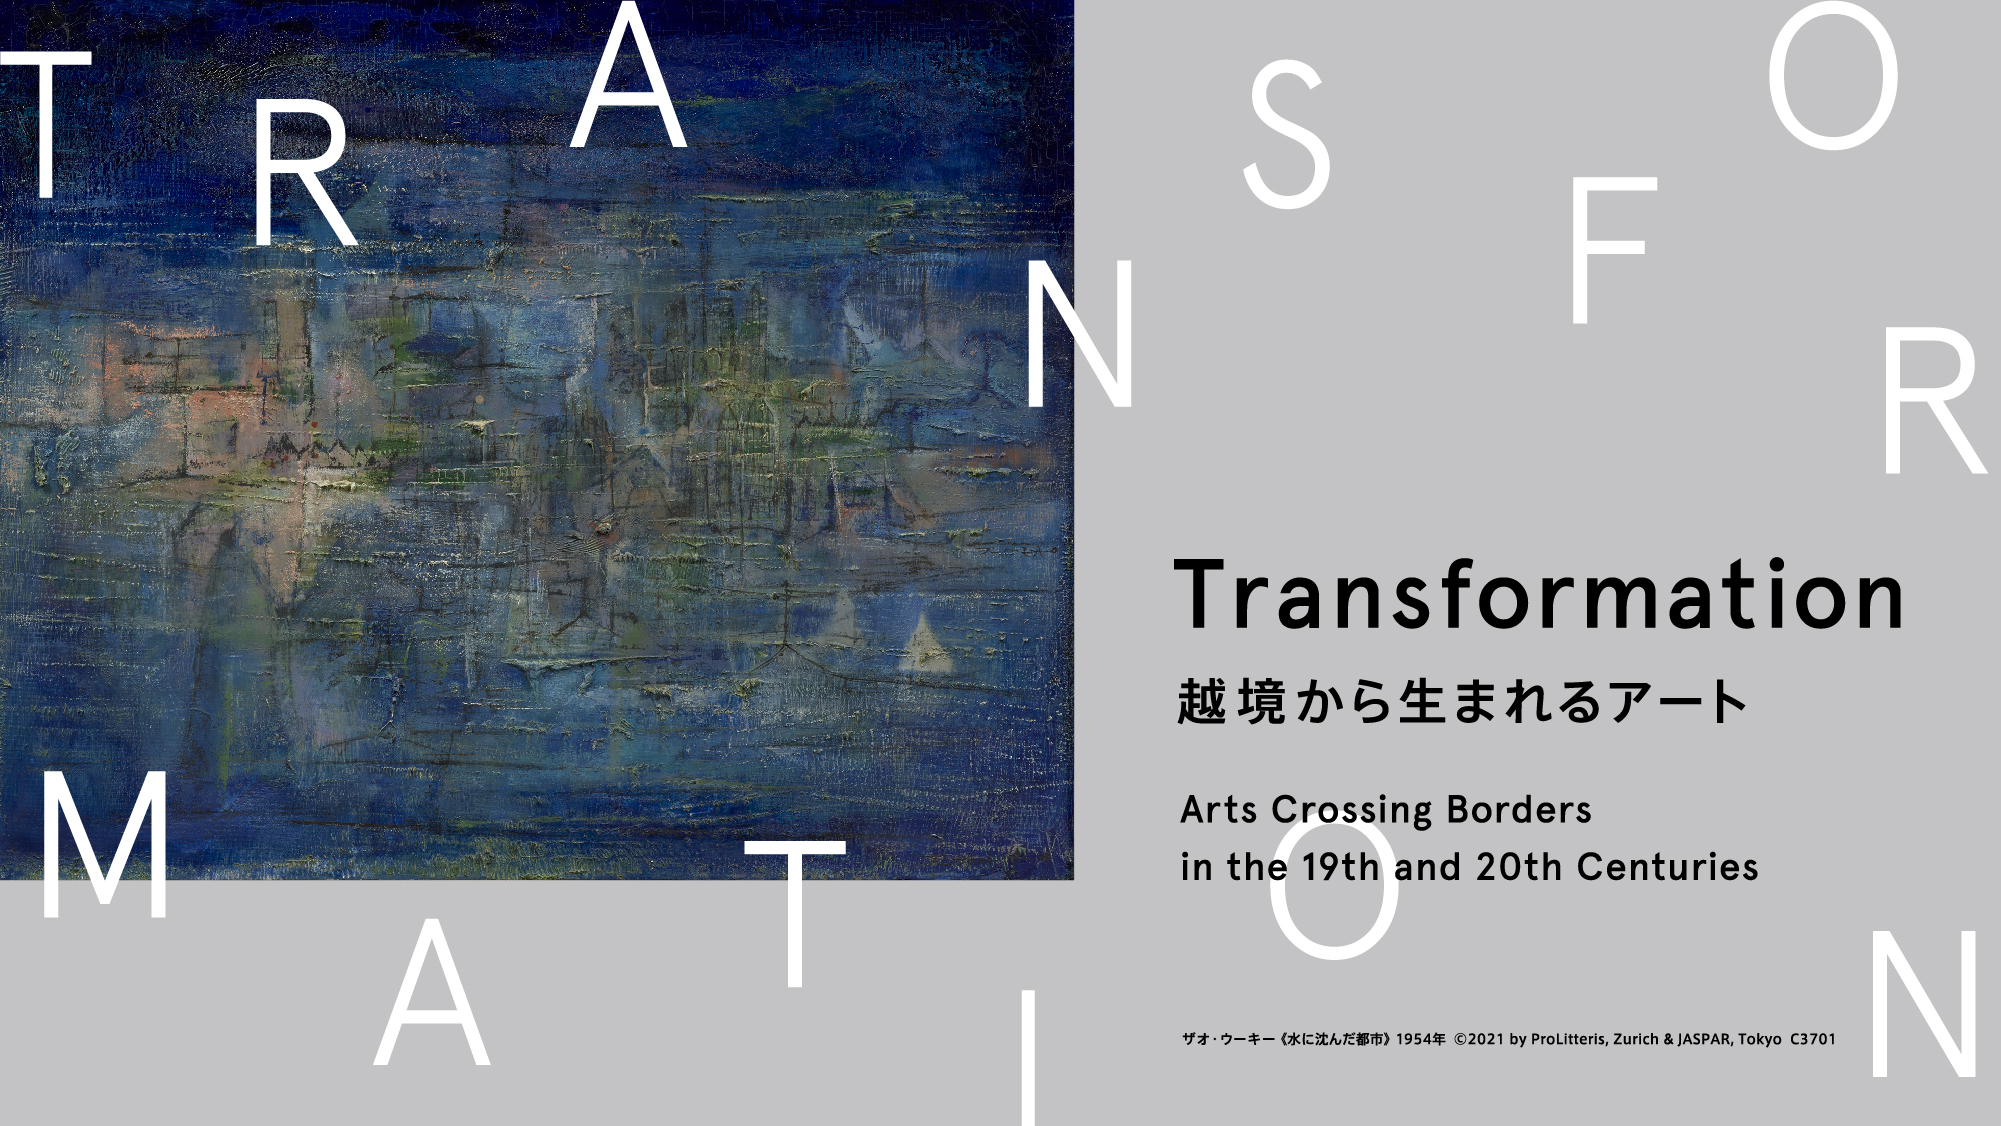 Transformation: Arts Crossing Borders in the 19th and 20th Centuries